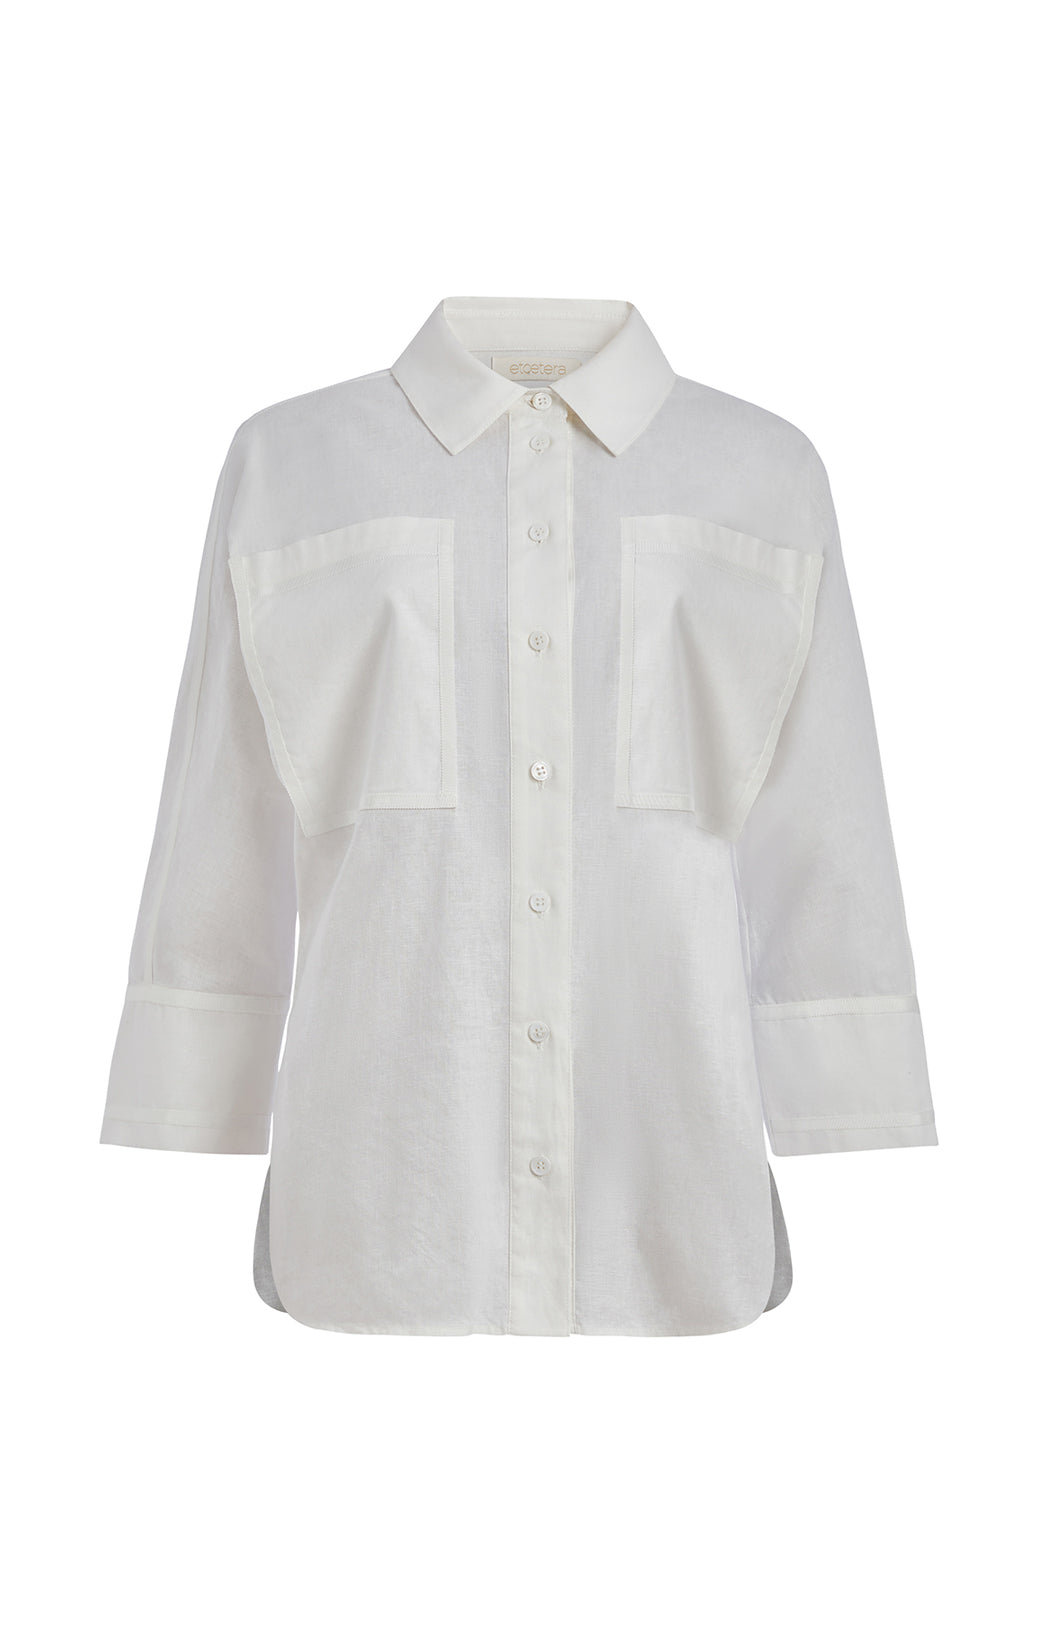 Cabo - White Sateen Shirt With Back Cutouts - Product Image